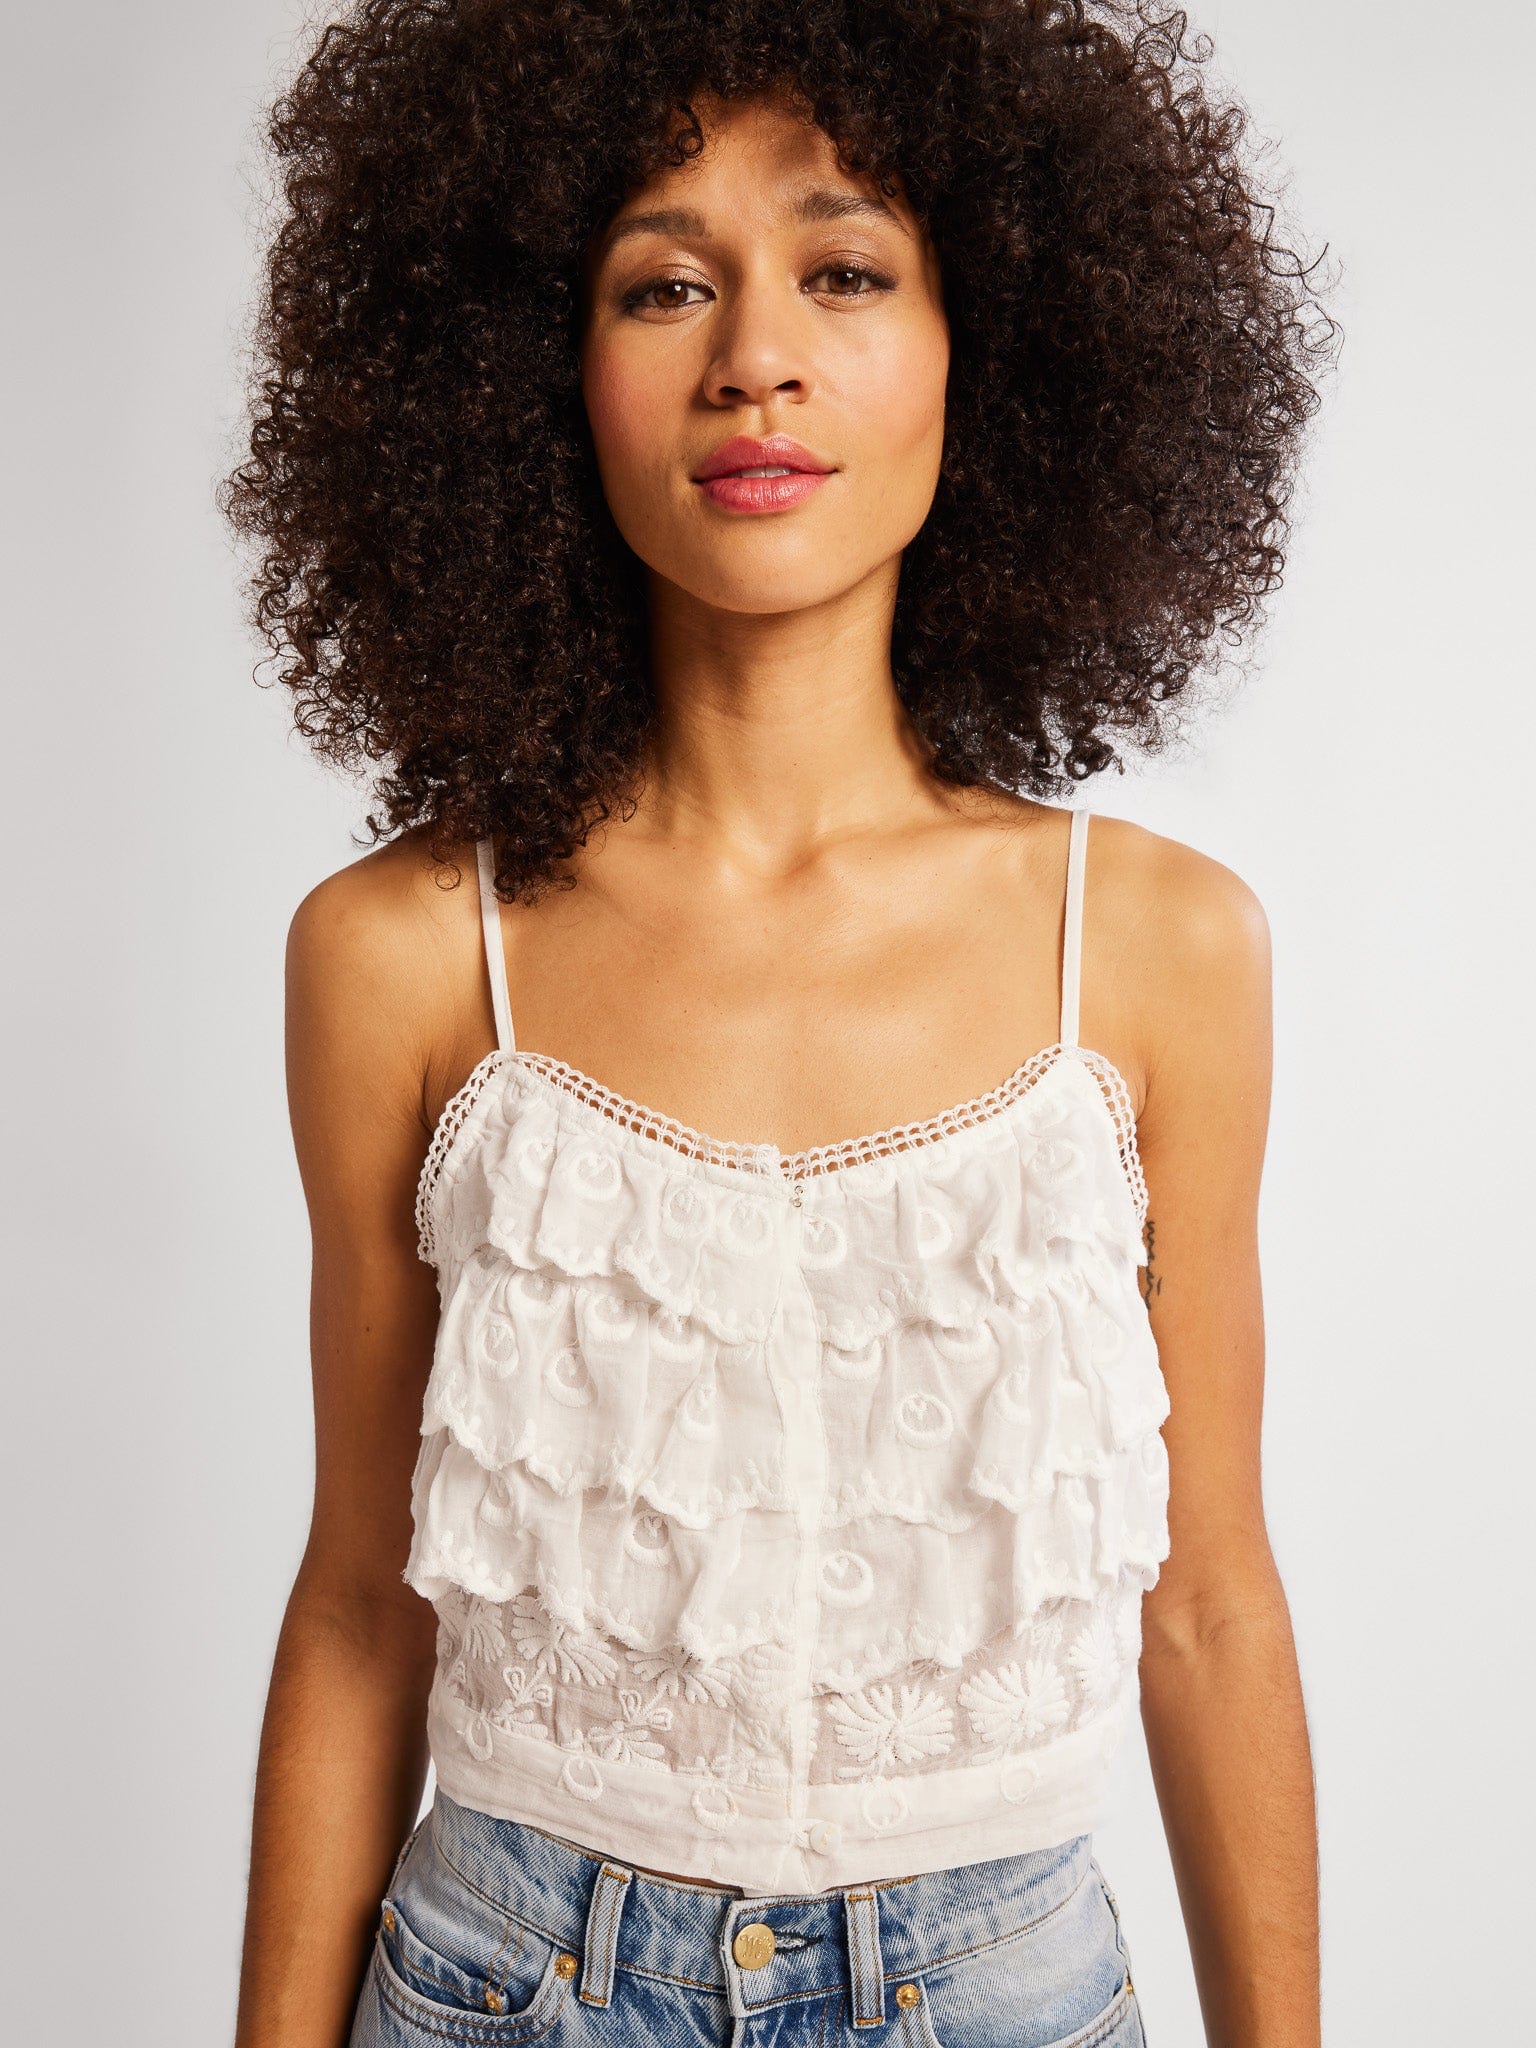 MILLE Clothing Patti Top in White Petal Embroidery